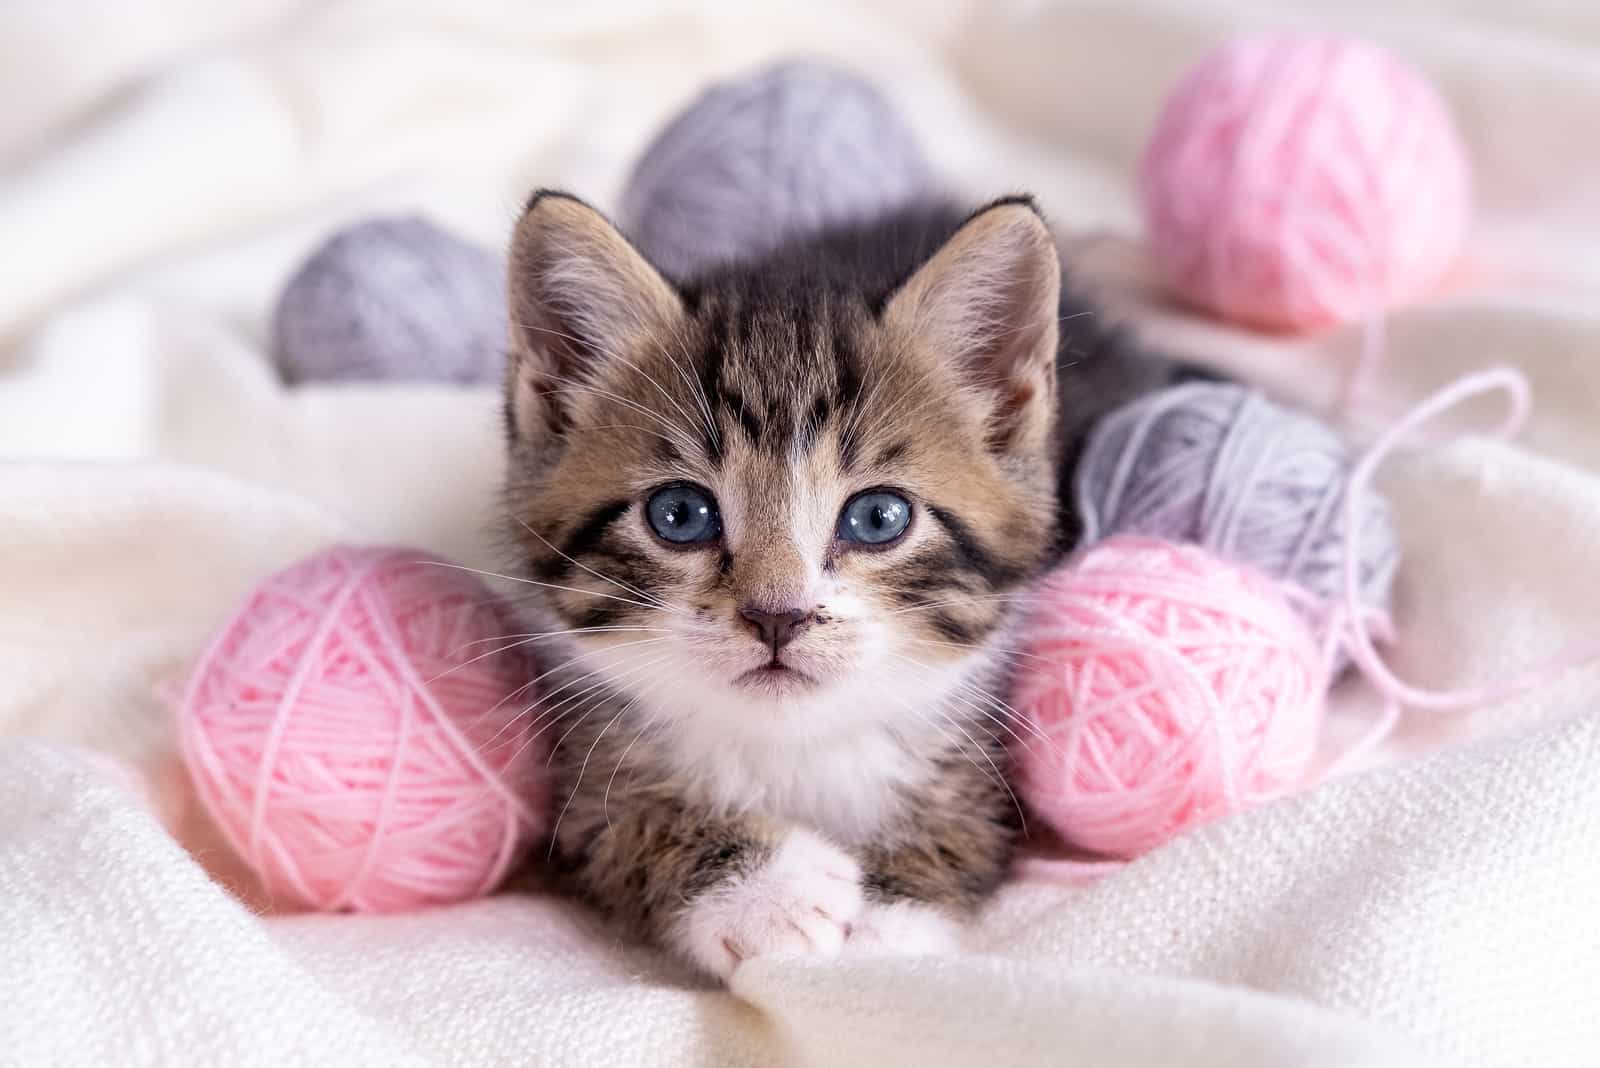 Striped cat playing with pink and grey balls